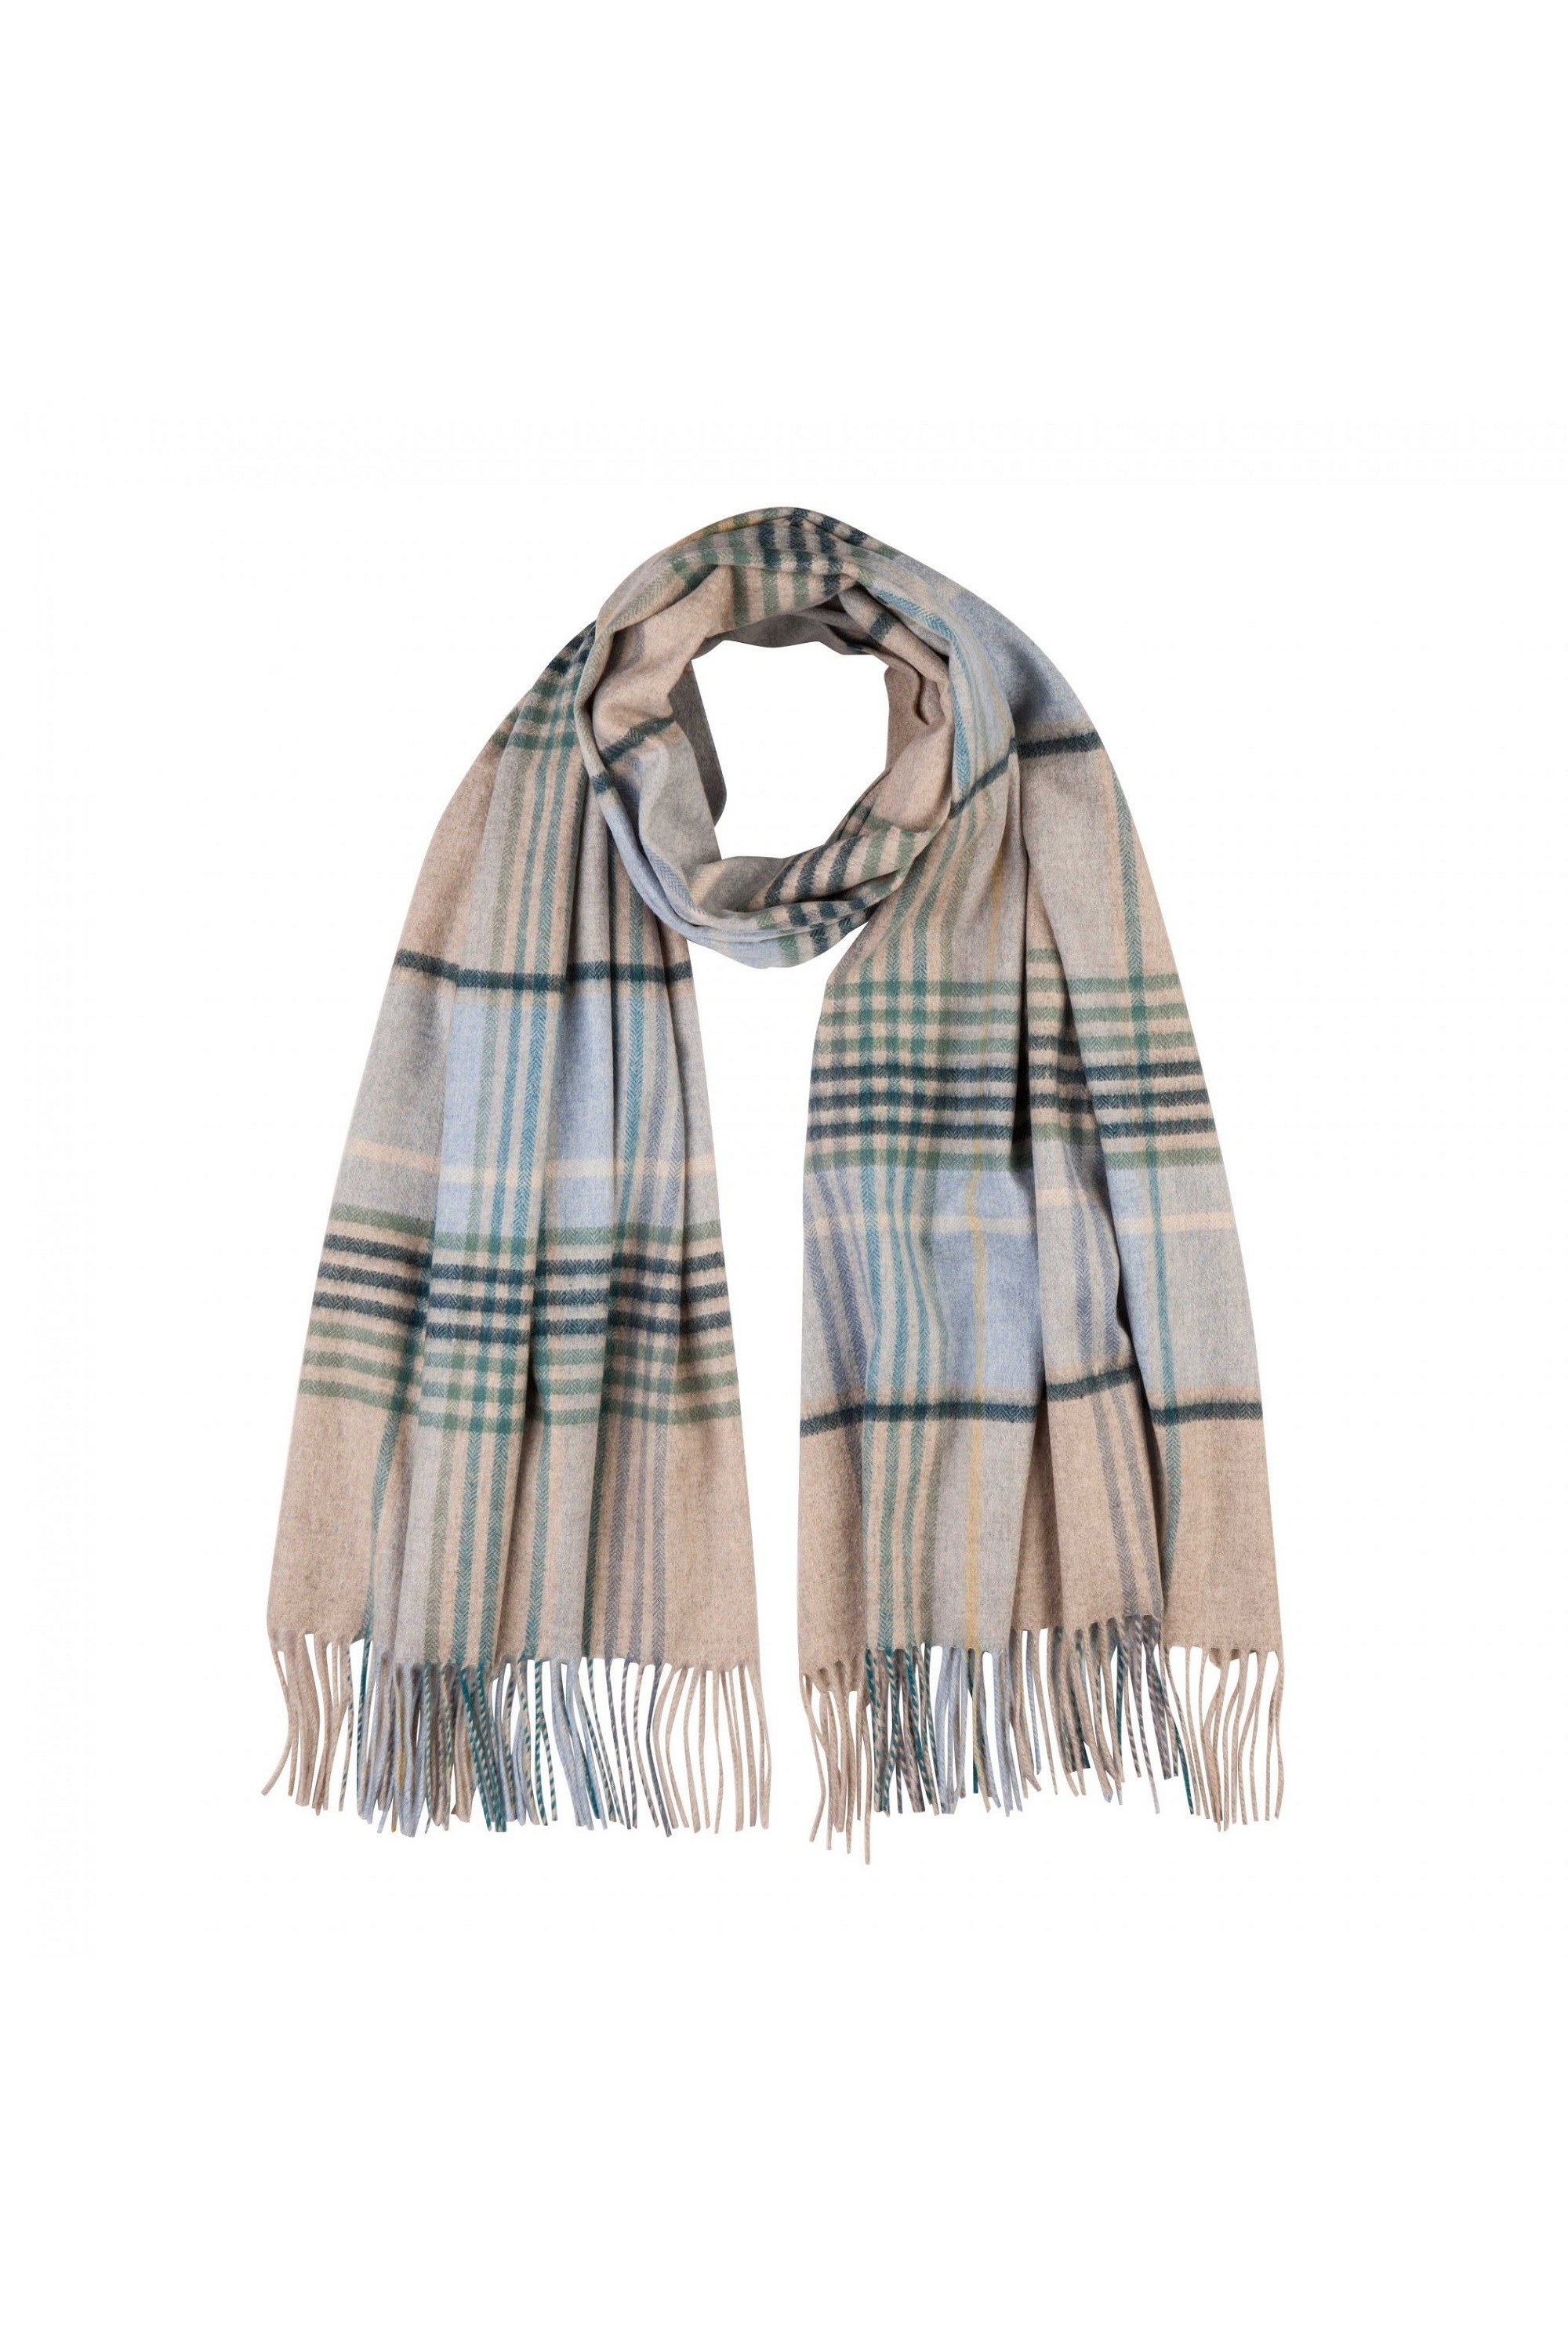 Cashmere Stole - Gingam Check Soft Forest